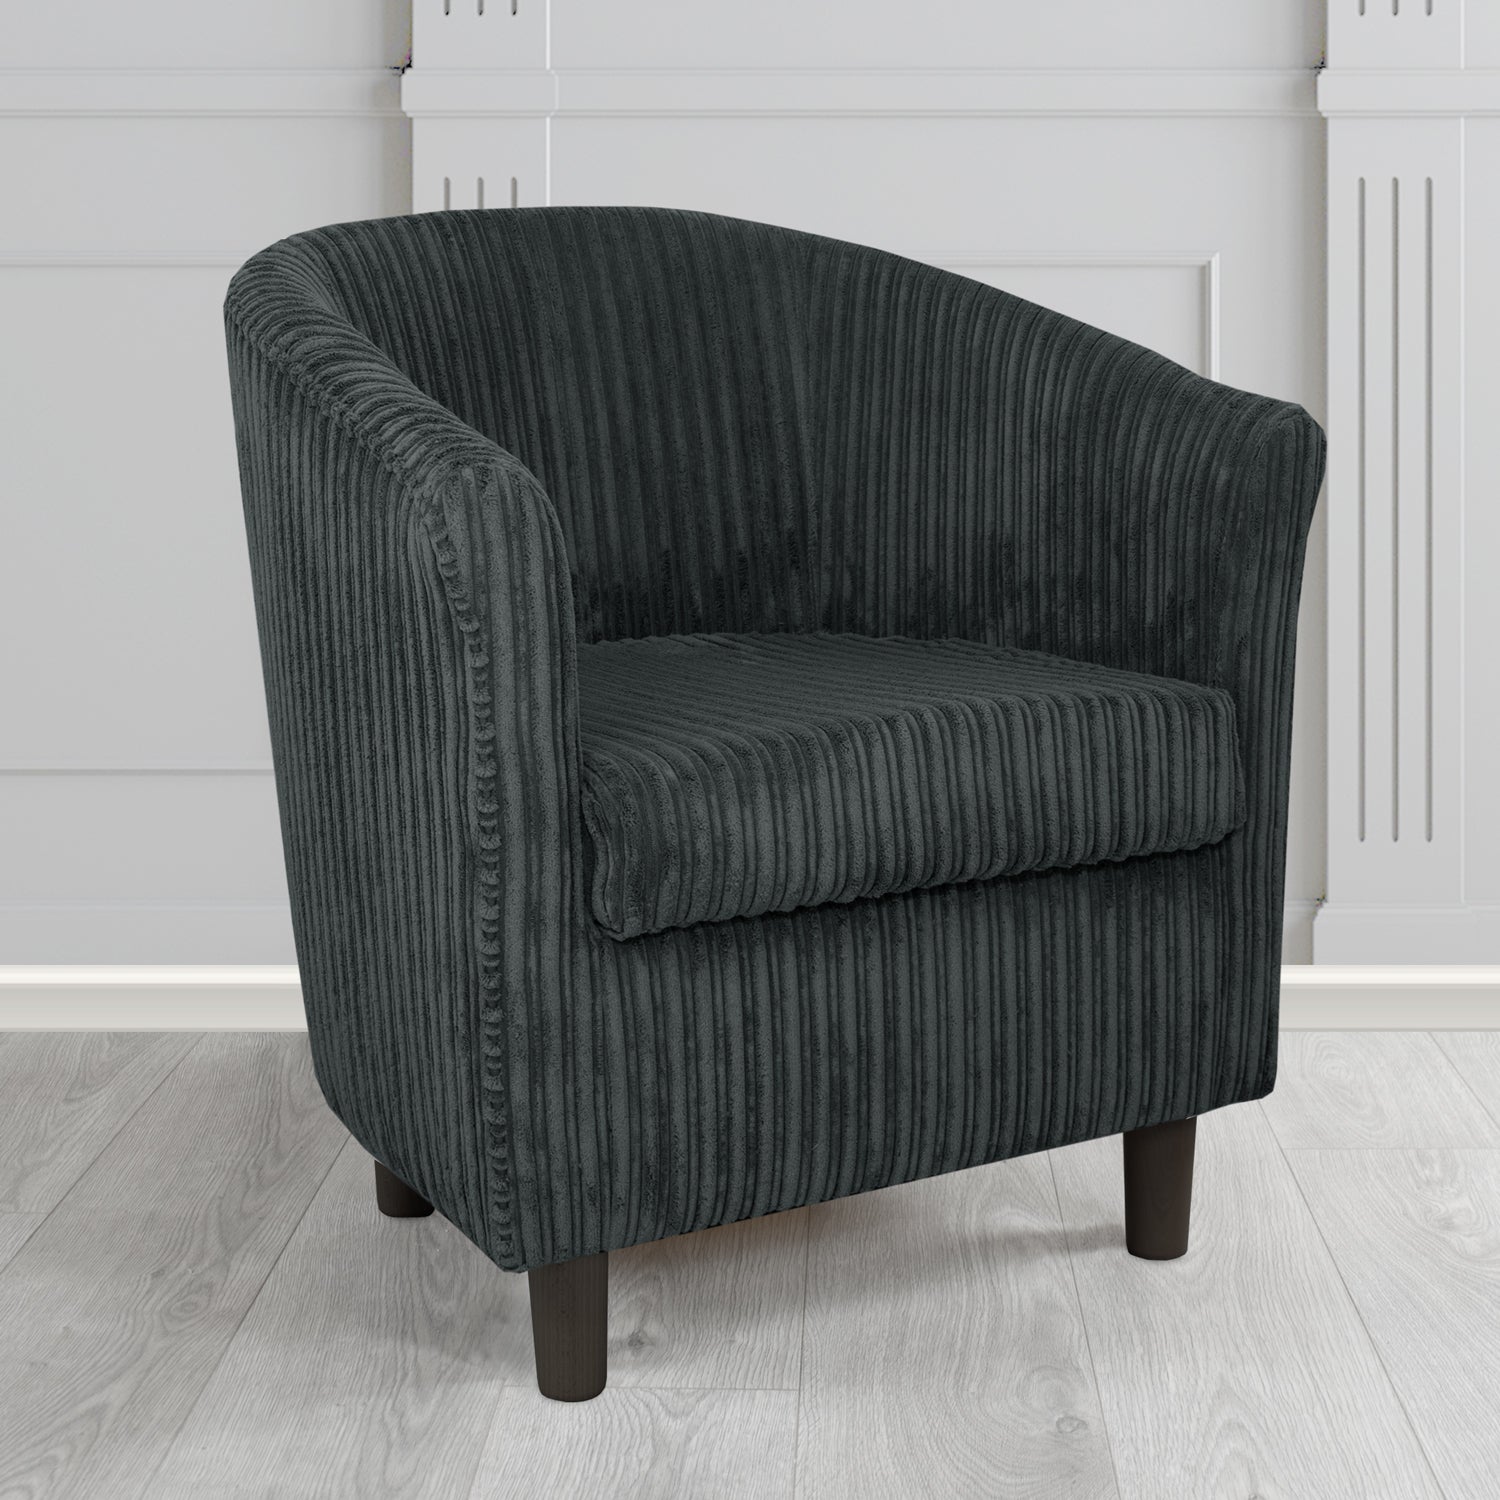 Tuscany in Conway Black Plain Textured Fabric Tub Chair (6581714550826)